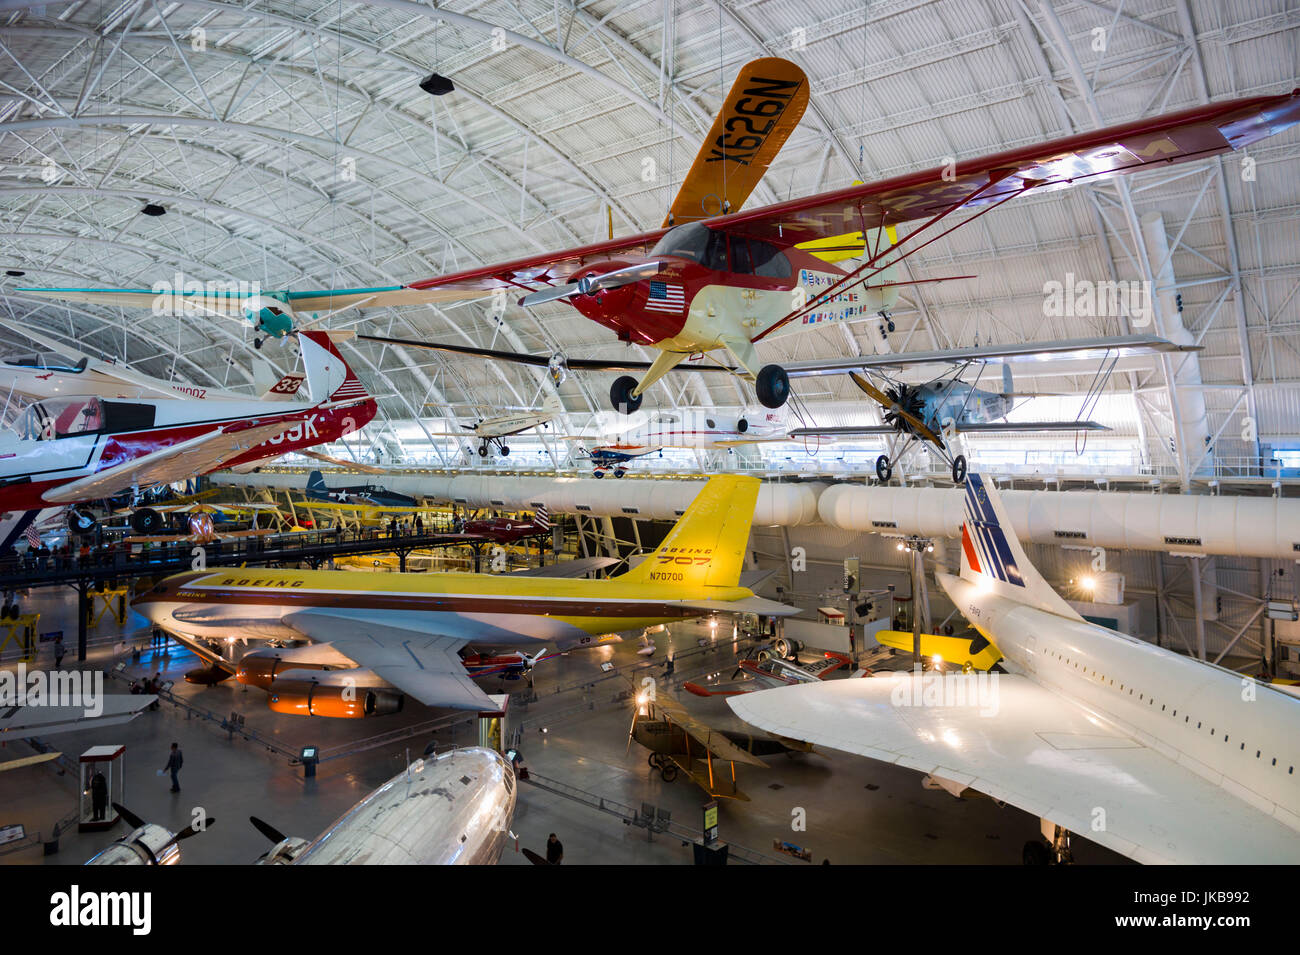 USA, Virginia, Herdon, National Air and Space Museum, Steven F. Udvar-Hazy Center, air museum, commercial aviation exhibits, Concorde supersonic airliner, elevated view Stock Photo